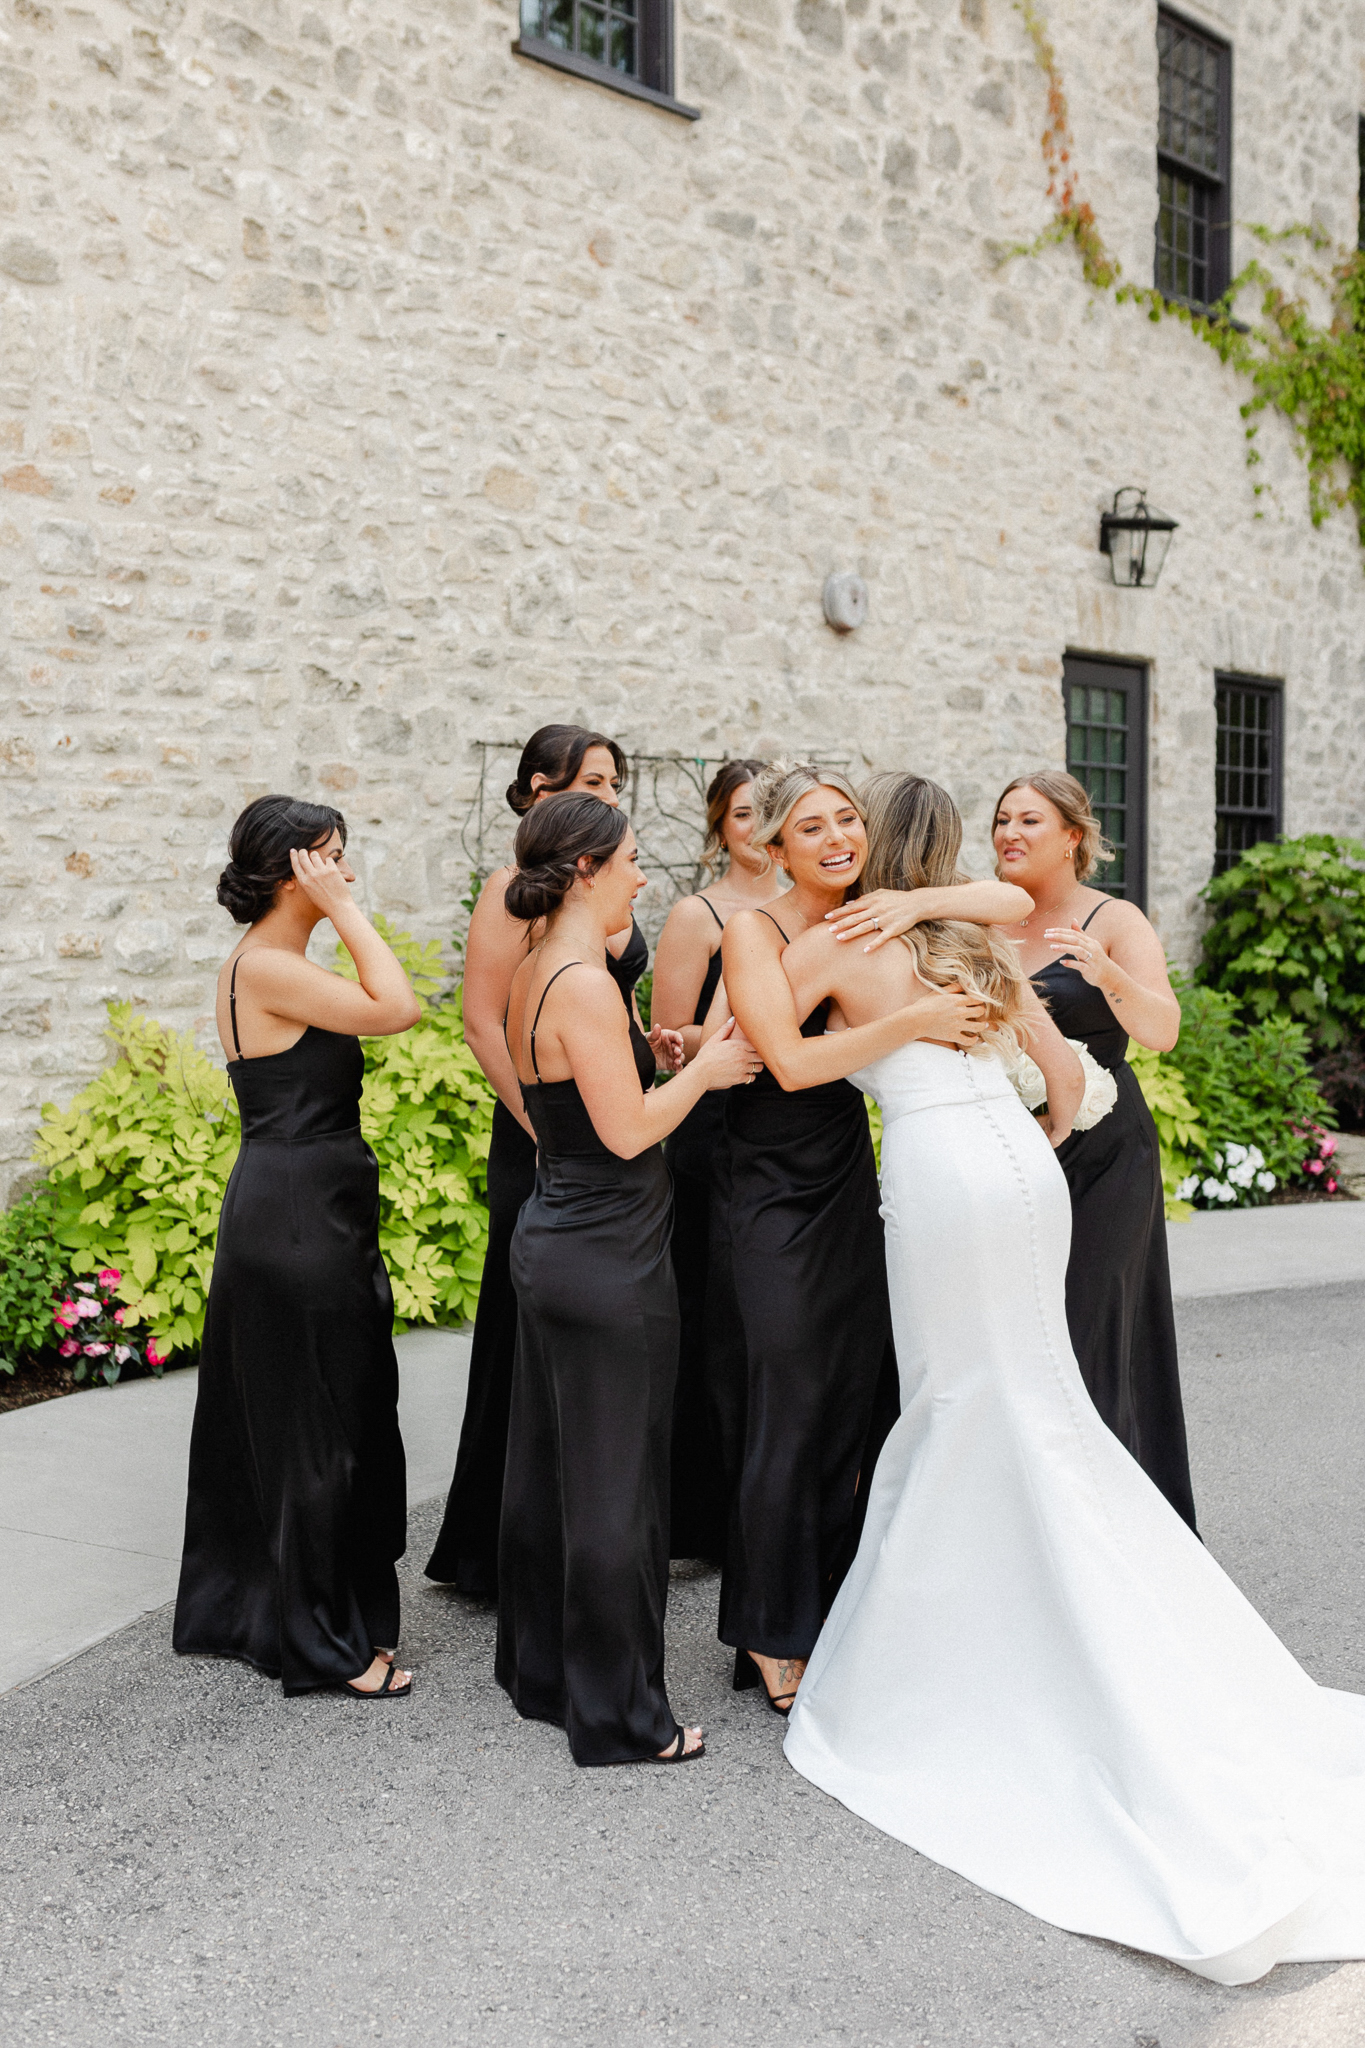 Bridesmaid hugging the bride after bride reveal in front of a stone wall.